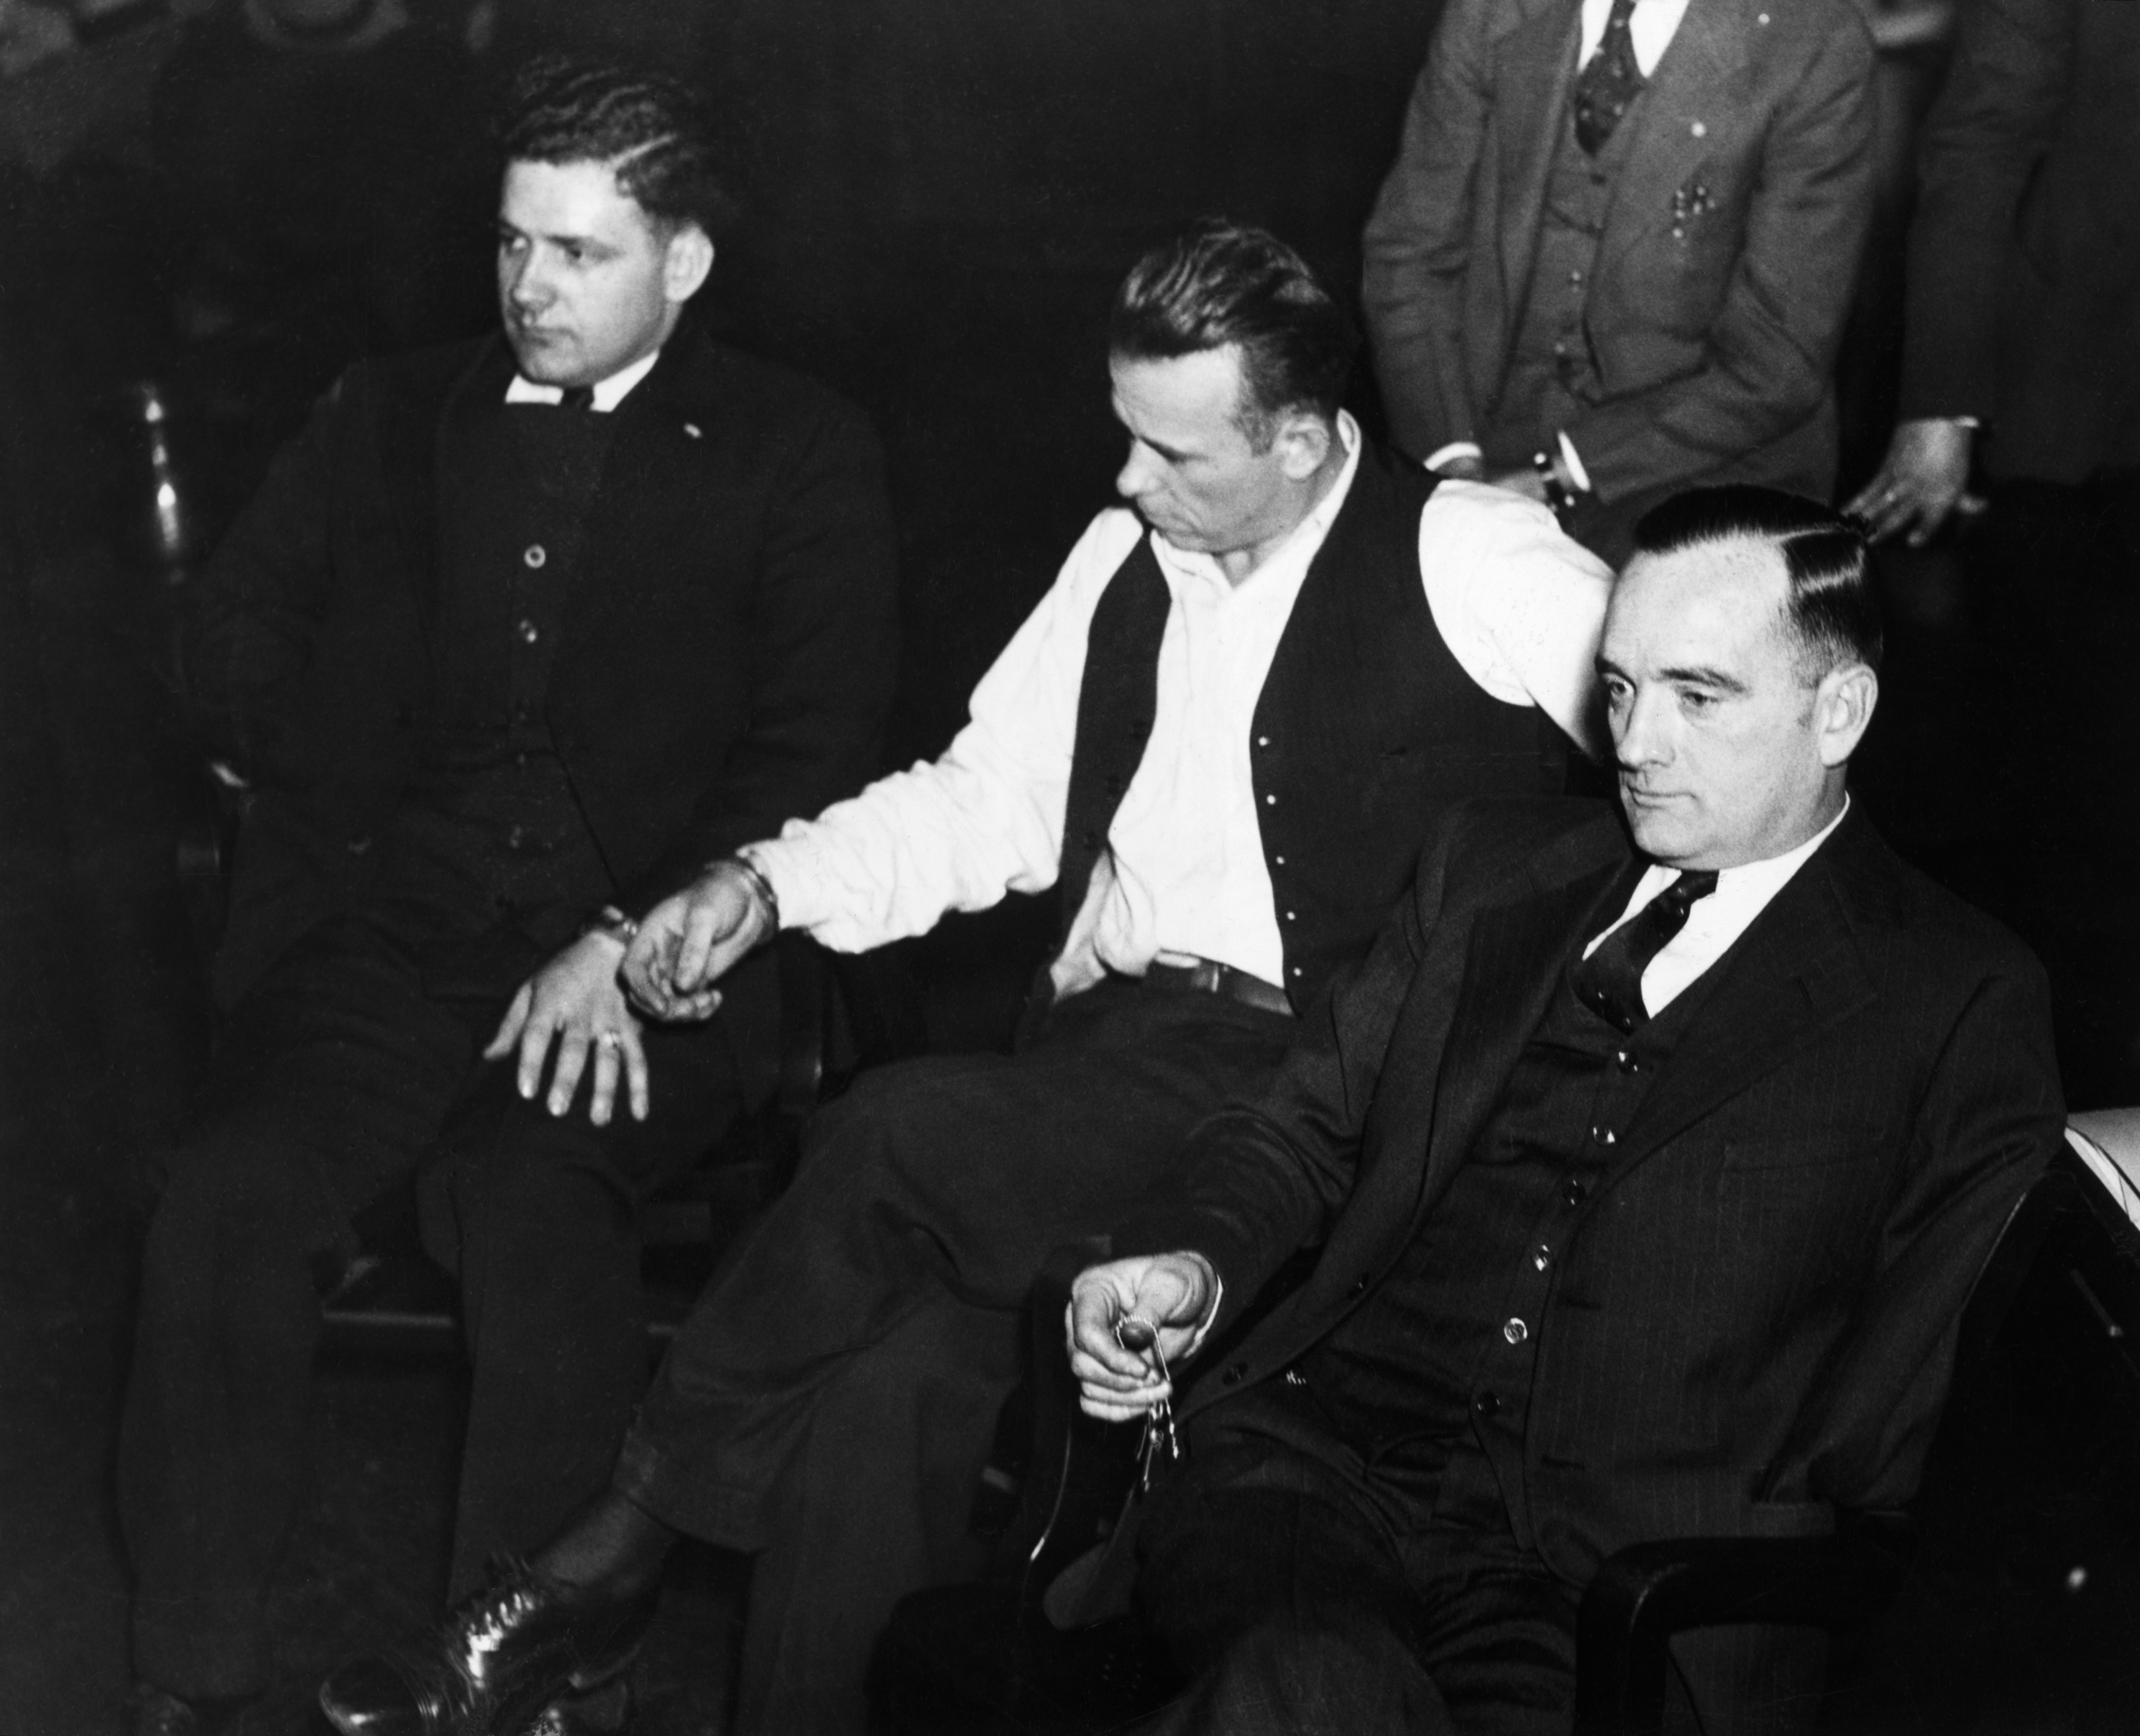 ca.1933, Indiana, USA --- Original caption: IN-John Dillinger, notorius criminal in Indiana court, manacled to Sheriff Holley. At right is attorney Joseph Ryan. Photograph. --- Image by © Corbis